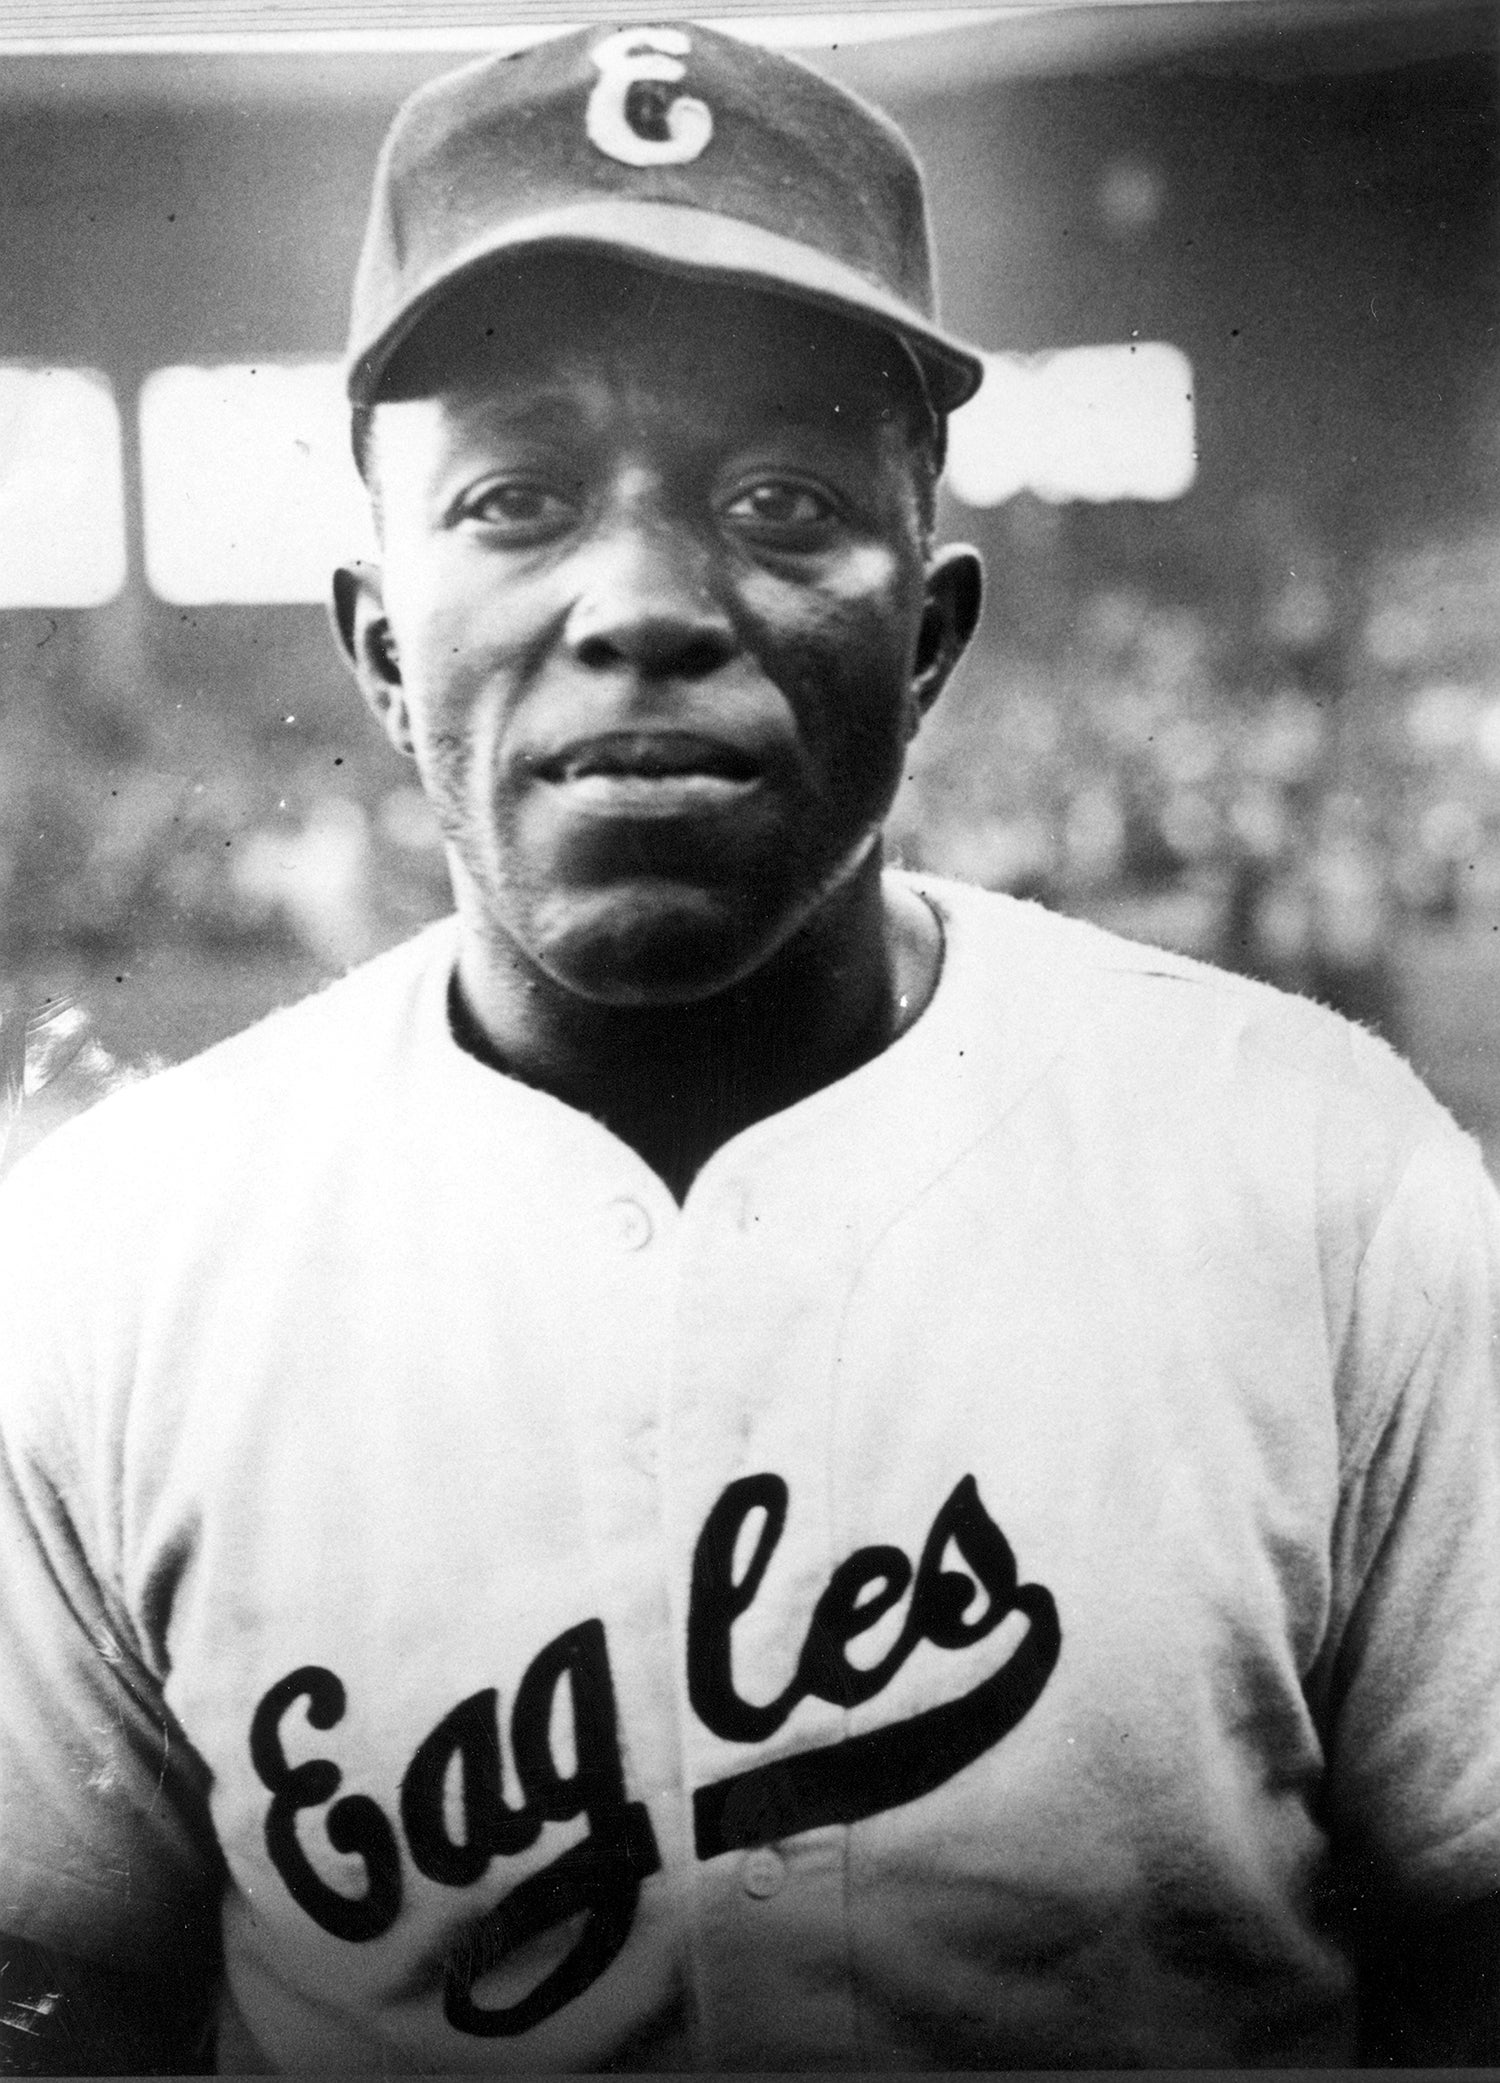 National Leon Day brings back memories of one of the Negro Leagues’ best pitchers